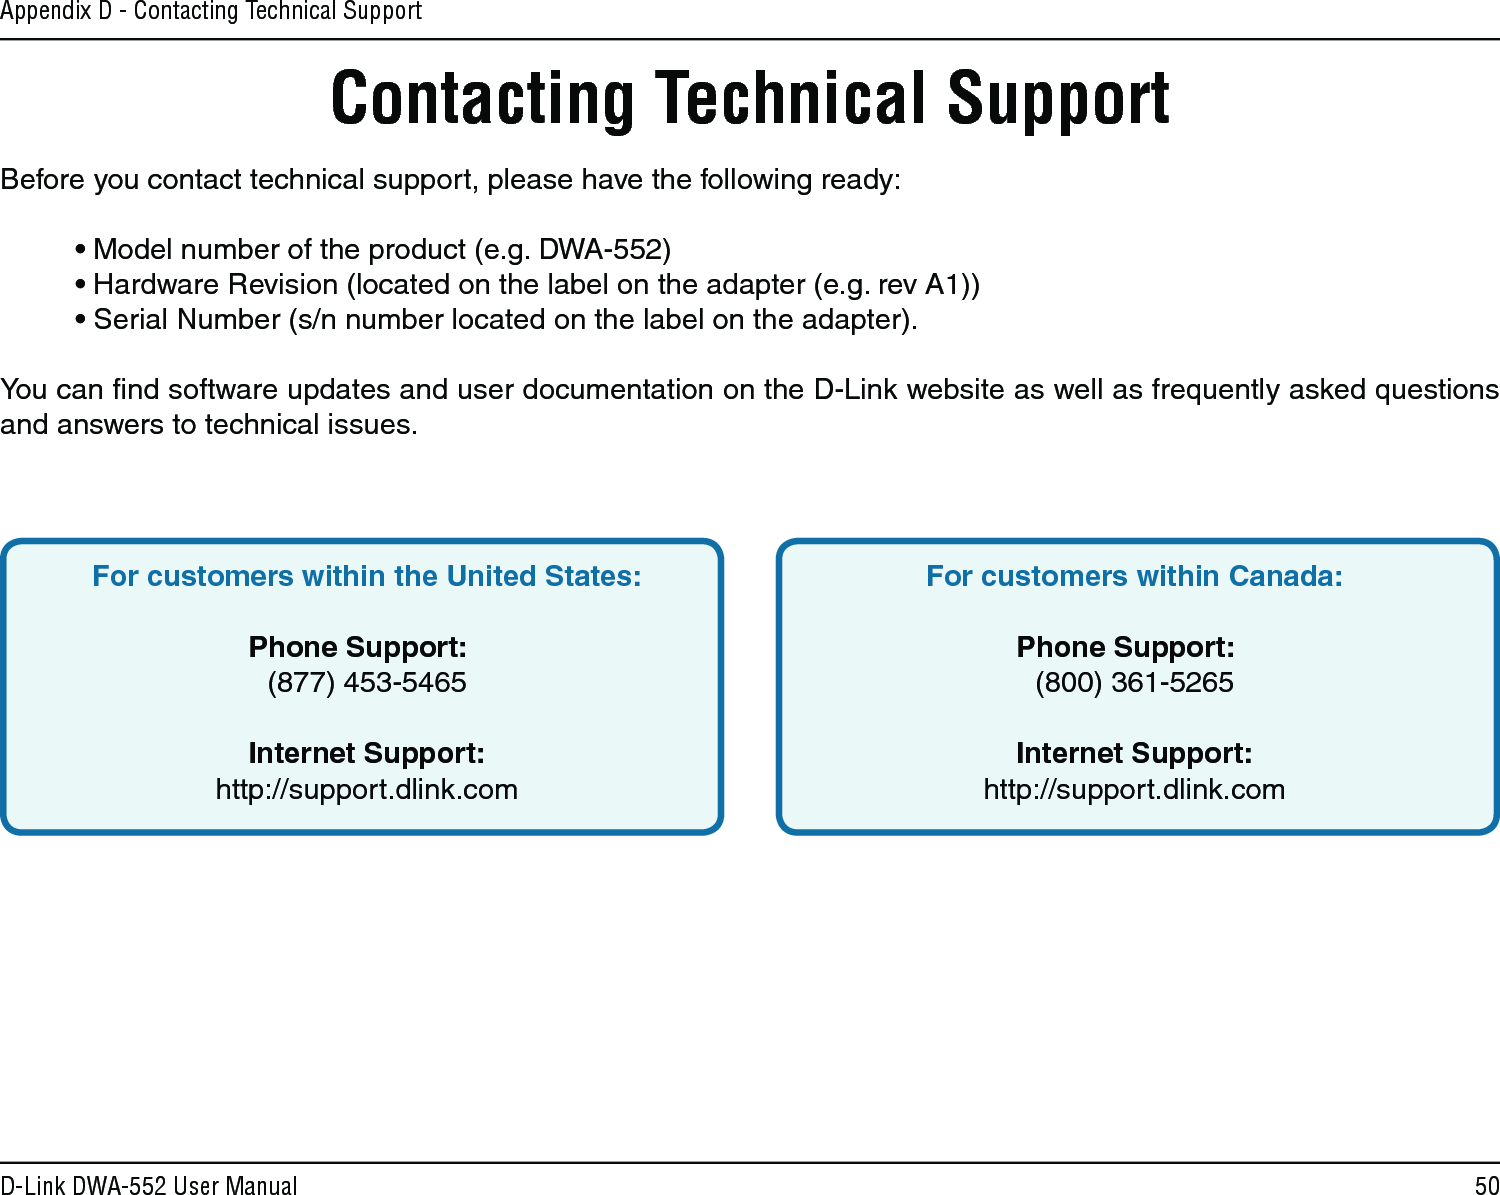 50D-Link DWA-552 User ManualAppendix D - Contacting Technical SupportContacting Technical SupportBefore you contact technical support, please have the following ready:  • Model number of the product (e.g. DWA-552)  • Hardware Revision (located on the label on the adapter (e.g. rev A1))  • Serial Number (s/n number located on the label on the adapter). You can ﬁnd software updates and user documentation on the D-Link website as well as frequently asked questions and answers to technical issues.For customers within the United States: Phone Support:  (877) 453-5465 Internet Support:  http://support.dlink.com For customers within Canada: Phone Support:  (800) 361-5265    Internet Support:  http://support.dlink.com 